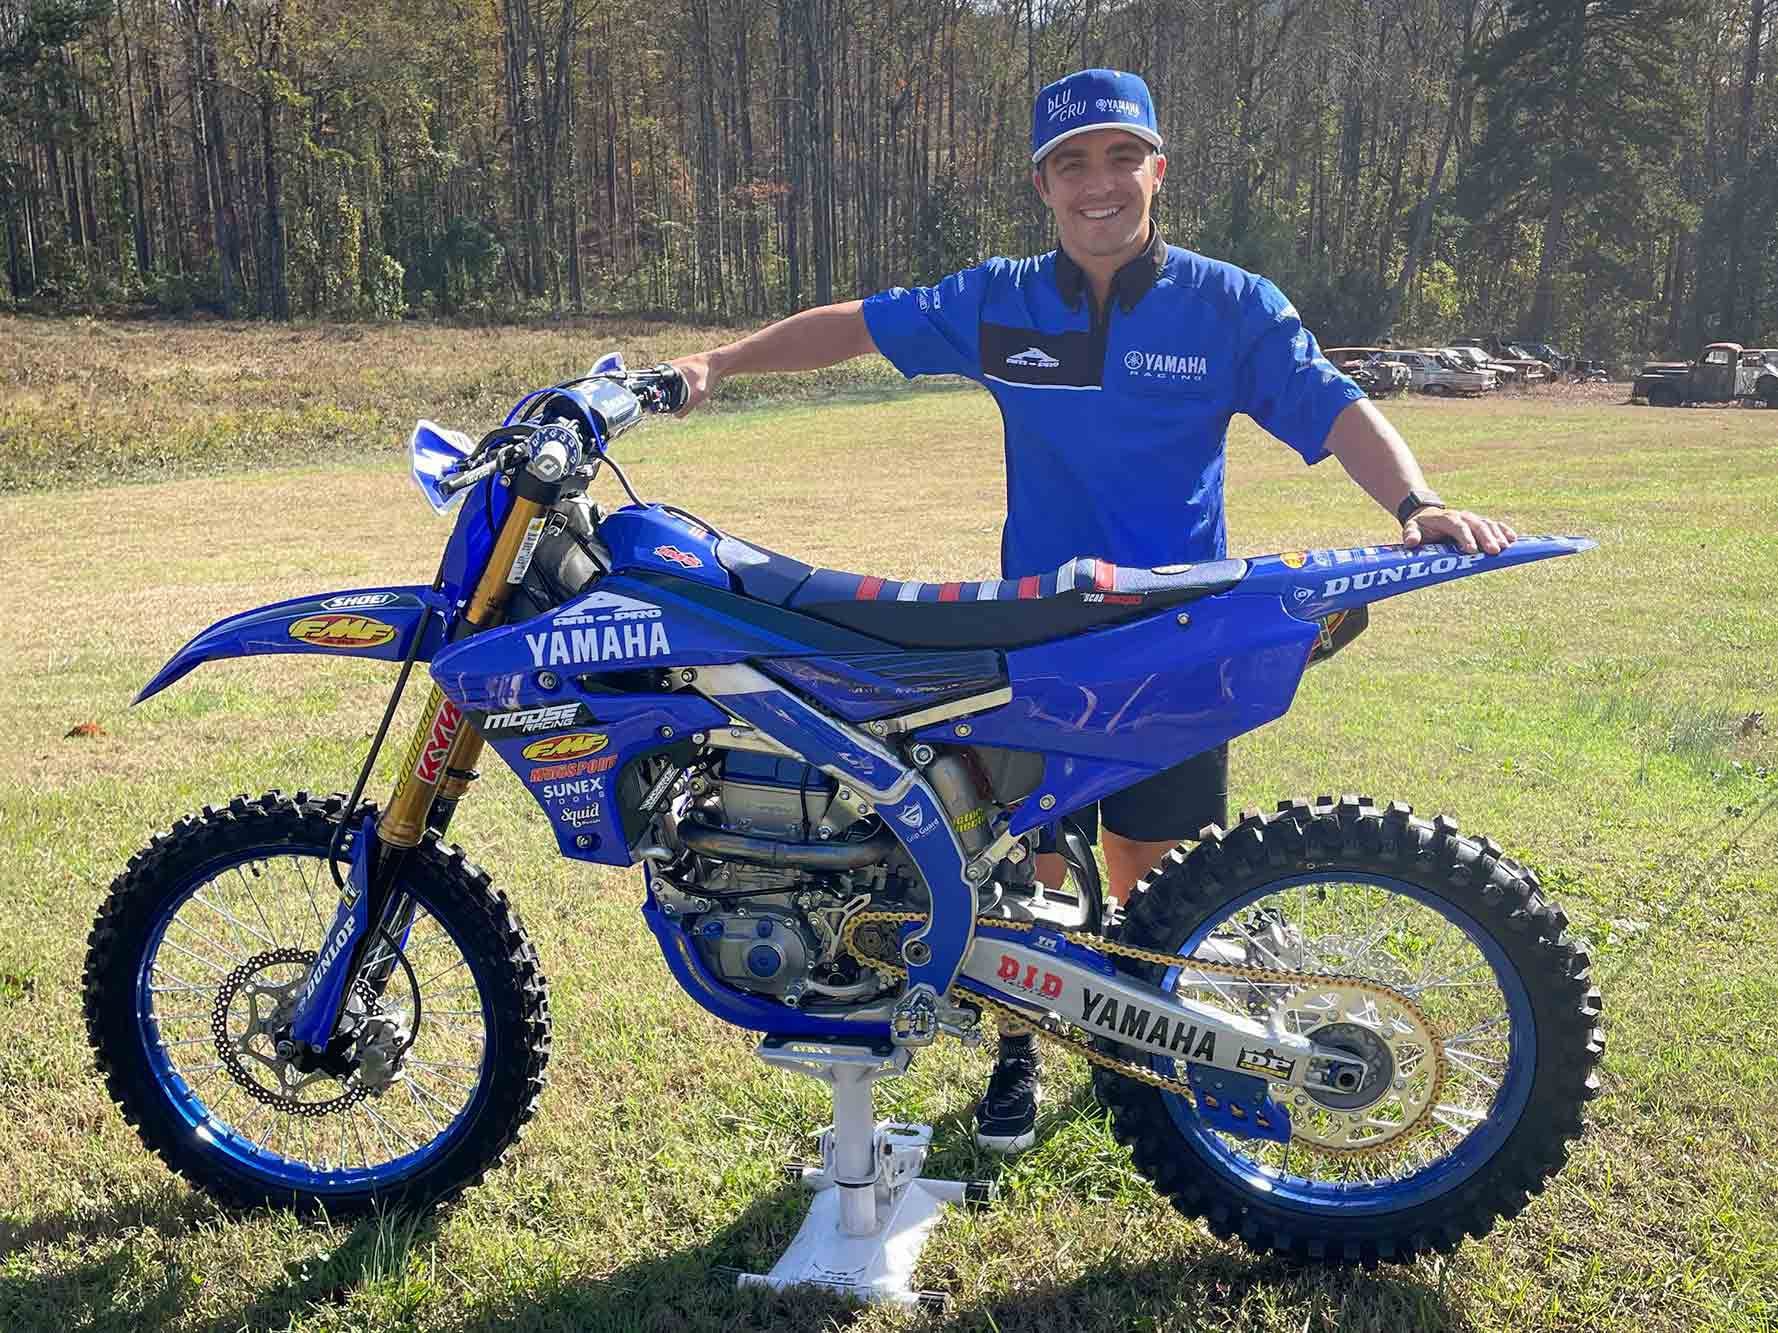 Zach Osborne has joined the AmPro Yamaha team to race GNCC and select rounds of the US Sprint Enduro series.